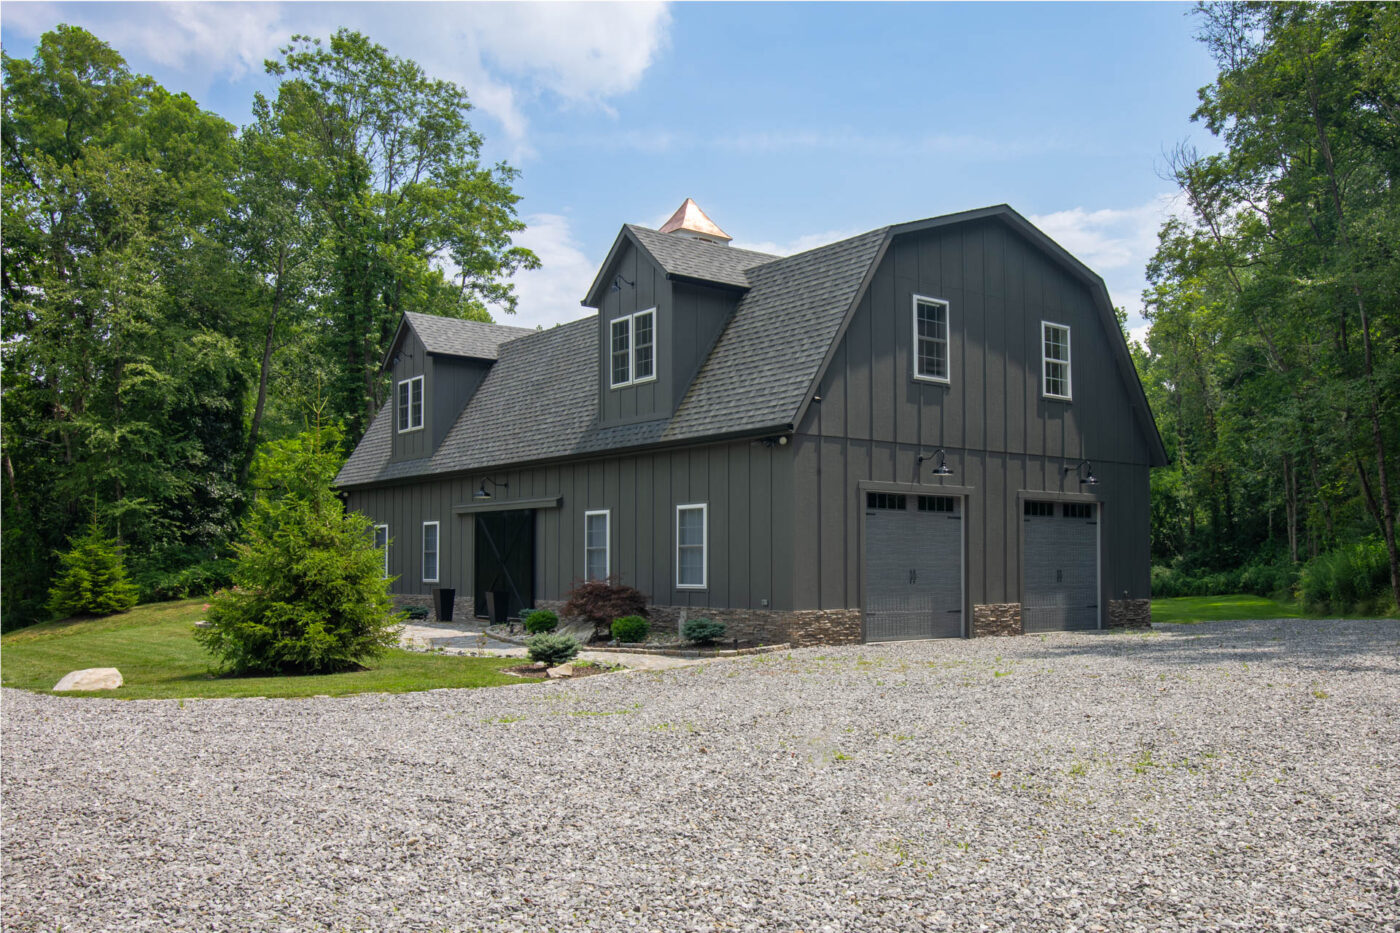 a custom painted 34x68 Legacy 2-Story MaxiBarn 2-Car Garage with 2 dormers and a cupola built by Sheds Unlimited in Holmes, NY